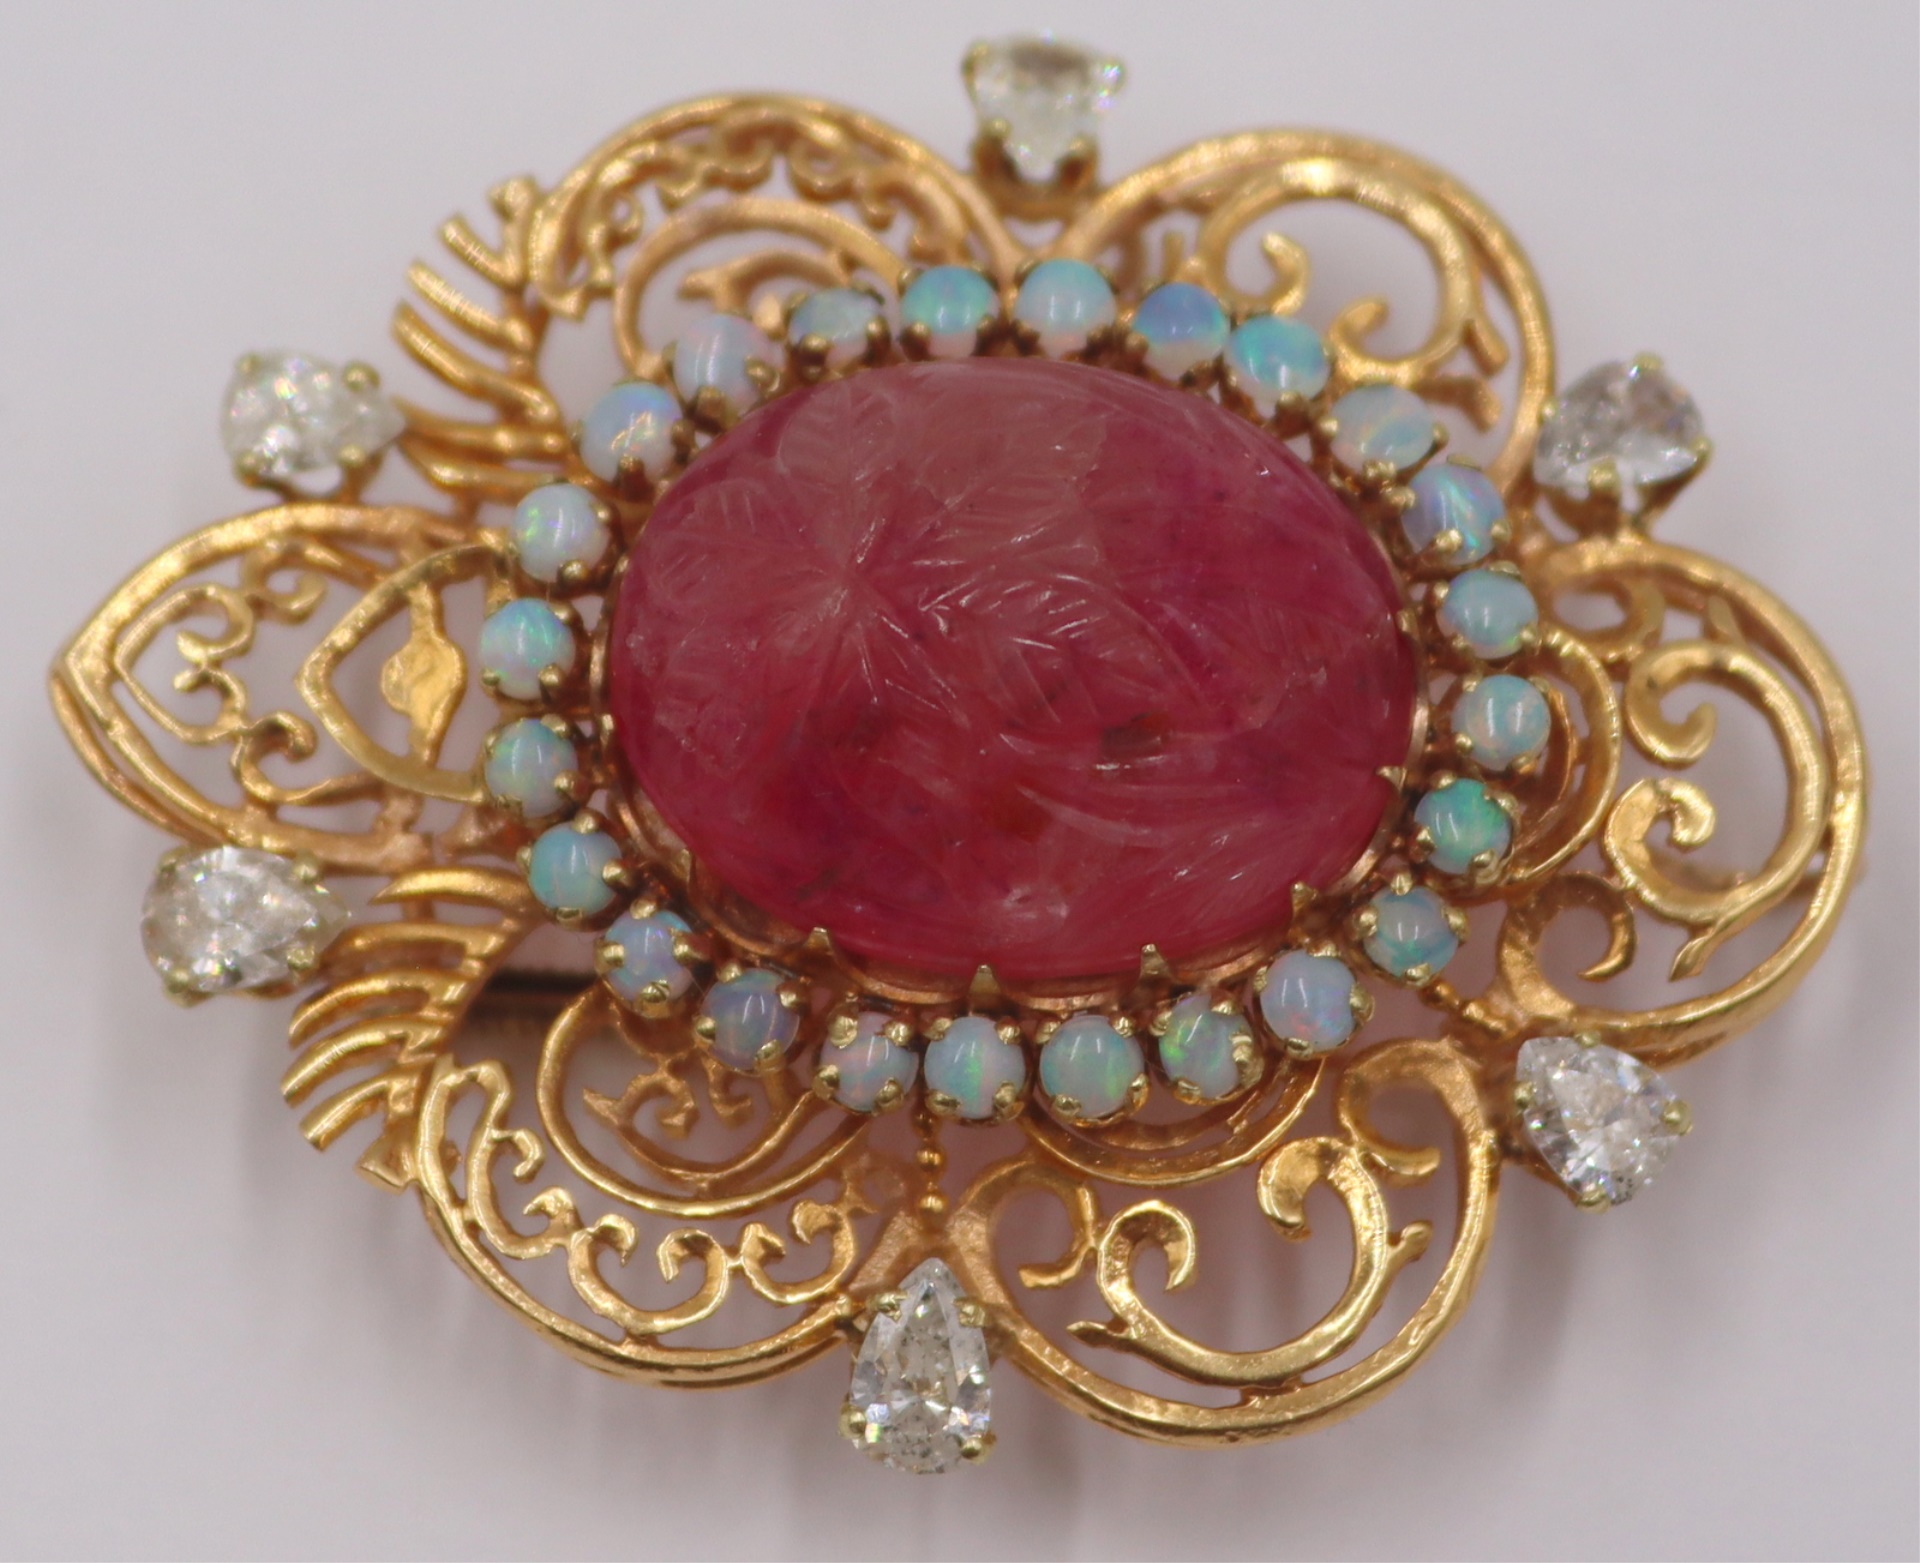 JEWELRY. 14KT GOLD, COLORED GEM,